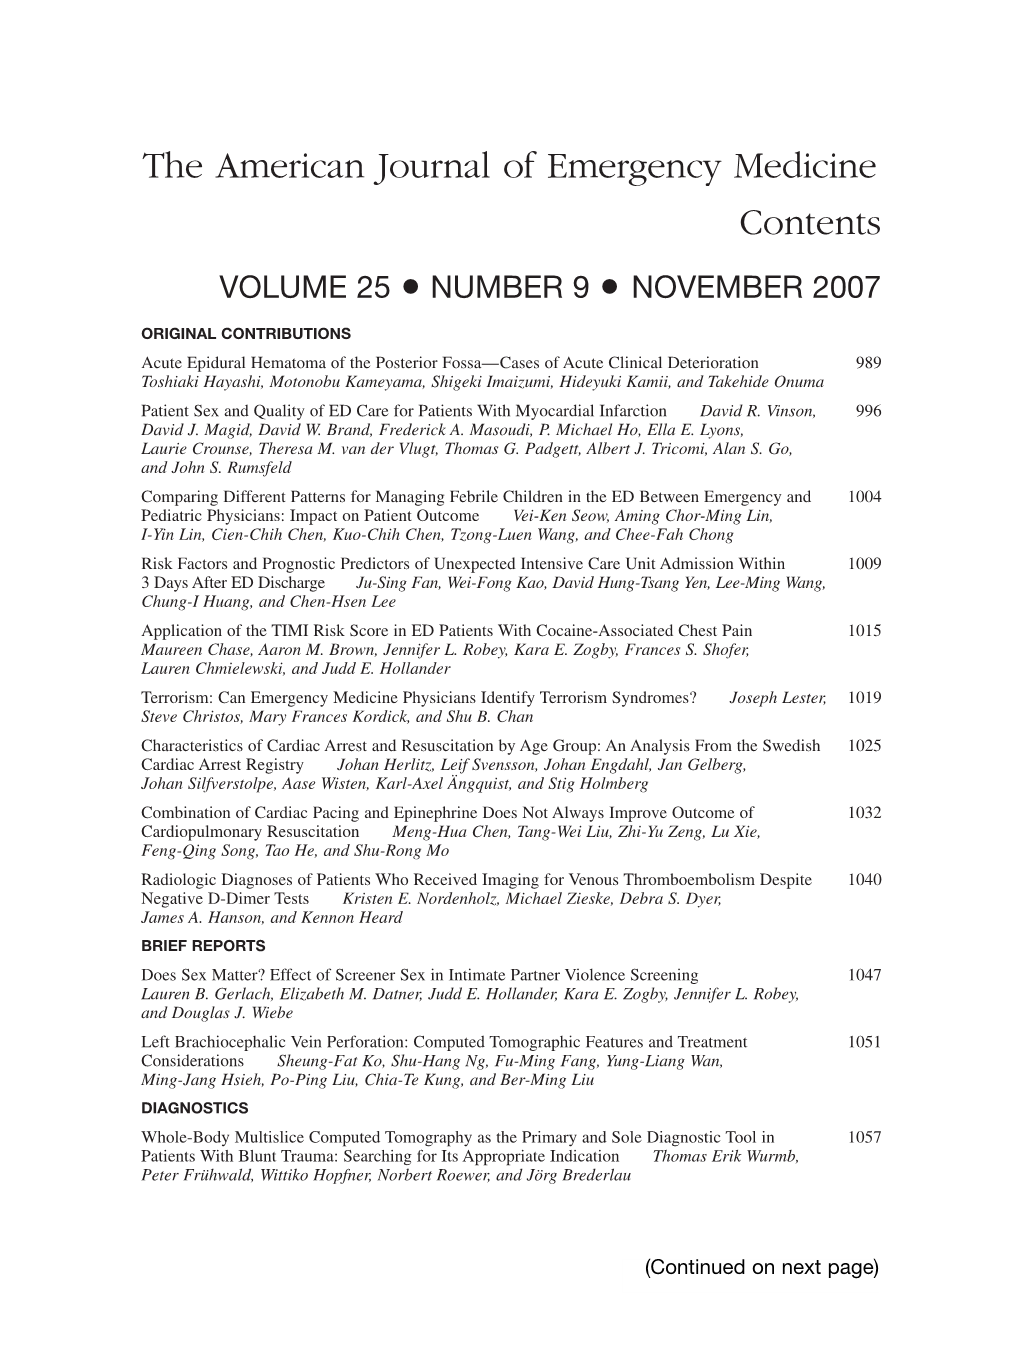 The American Journal of Emergency Medicine Contents VOLUME 25 • NUMBER 9 • NOVEMBER 2007